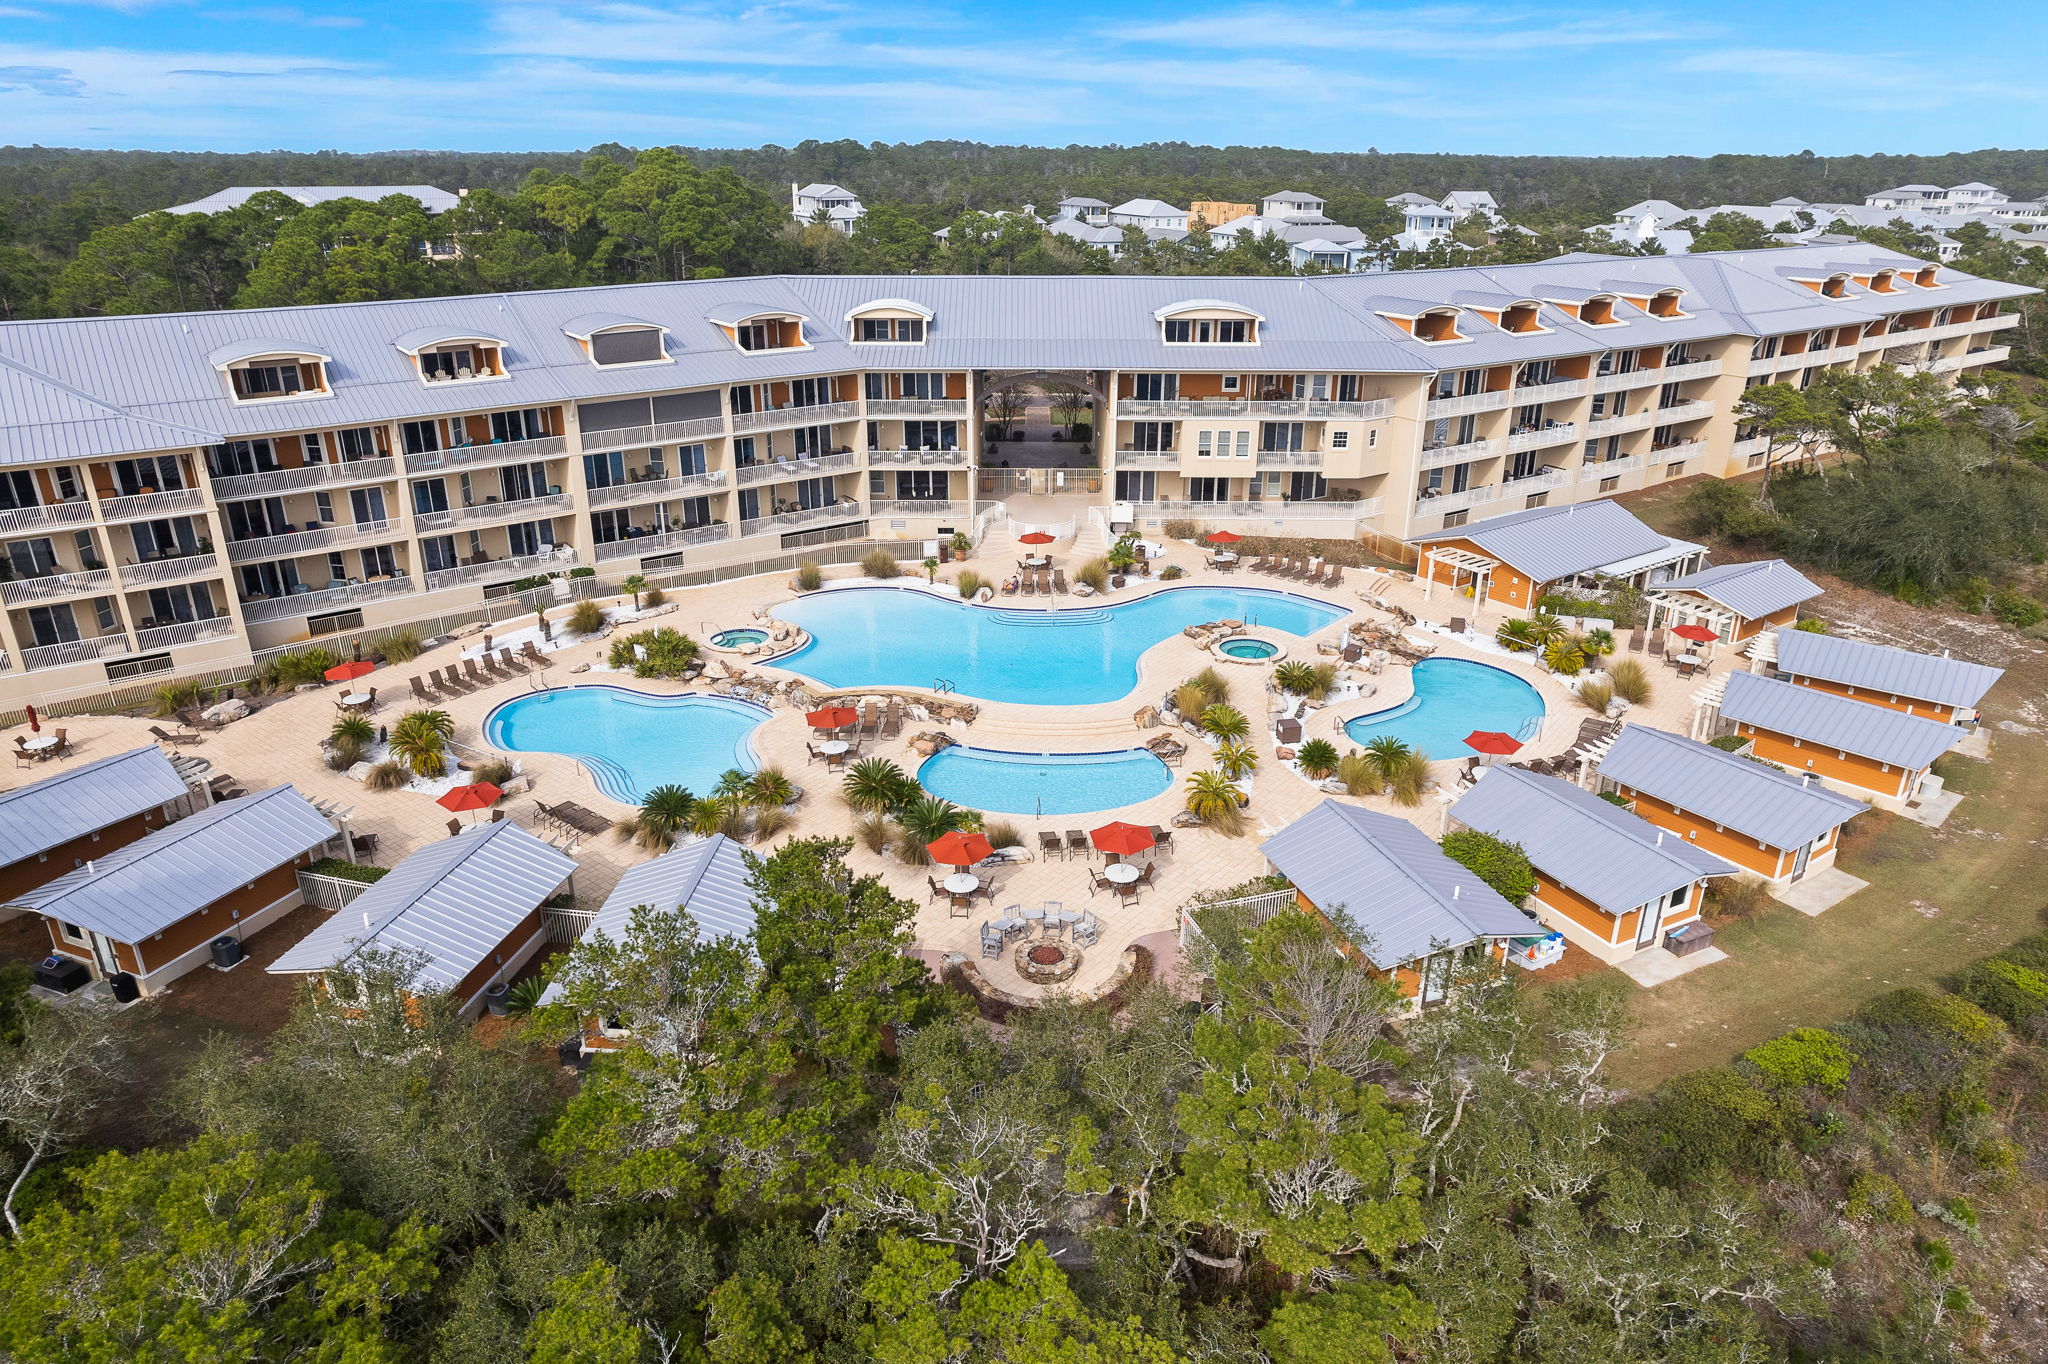 Condo In Gated 30A Complex Overlooking Coastal Dune Lake